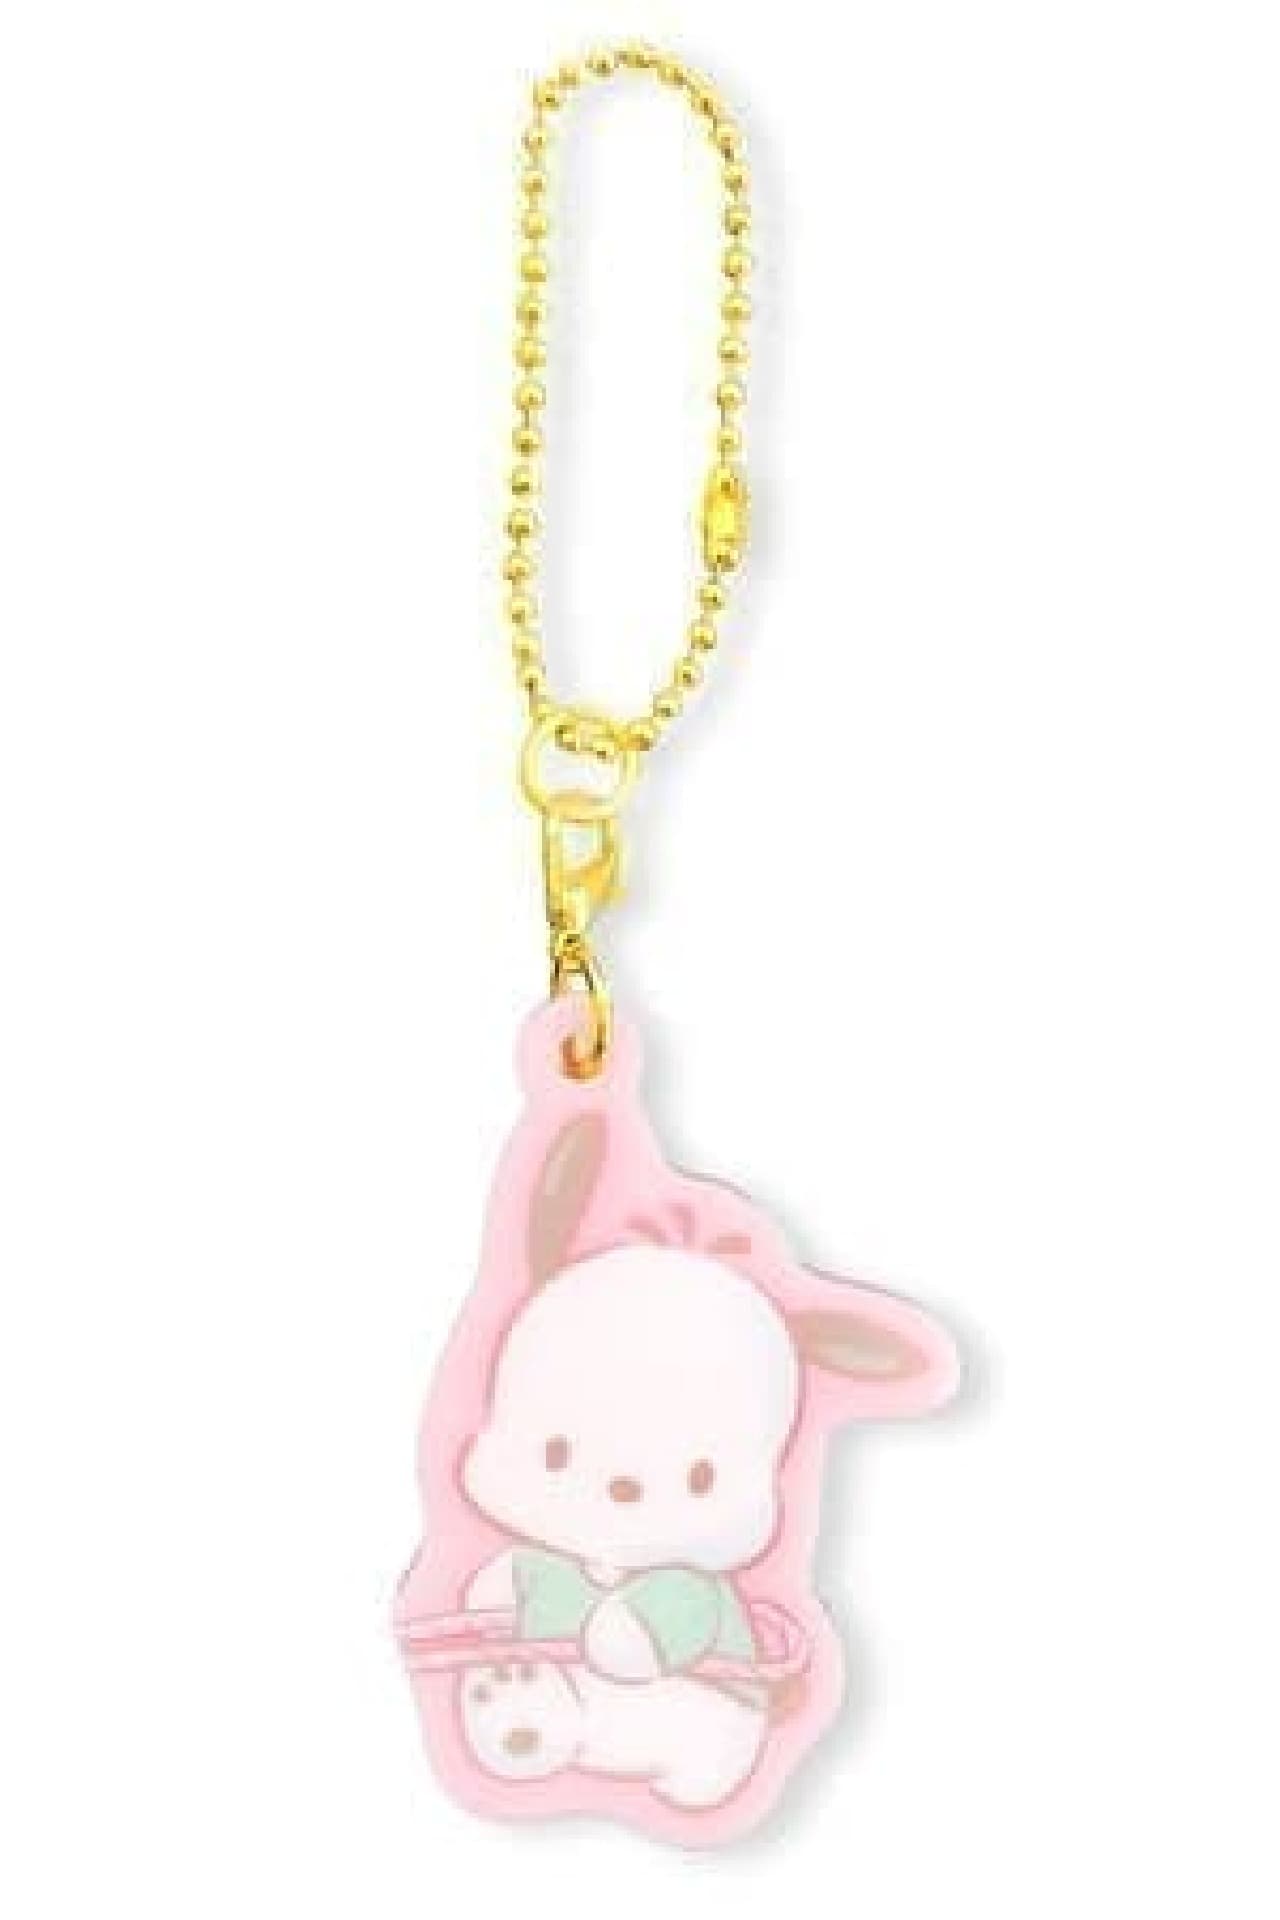 "Sanrio Characters Always Good Friends Series" New Item --Set of 3 Pompompurin Keychains